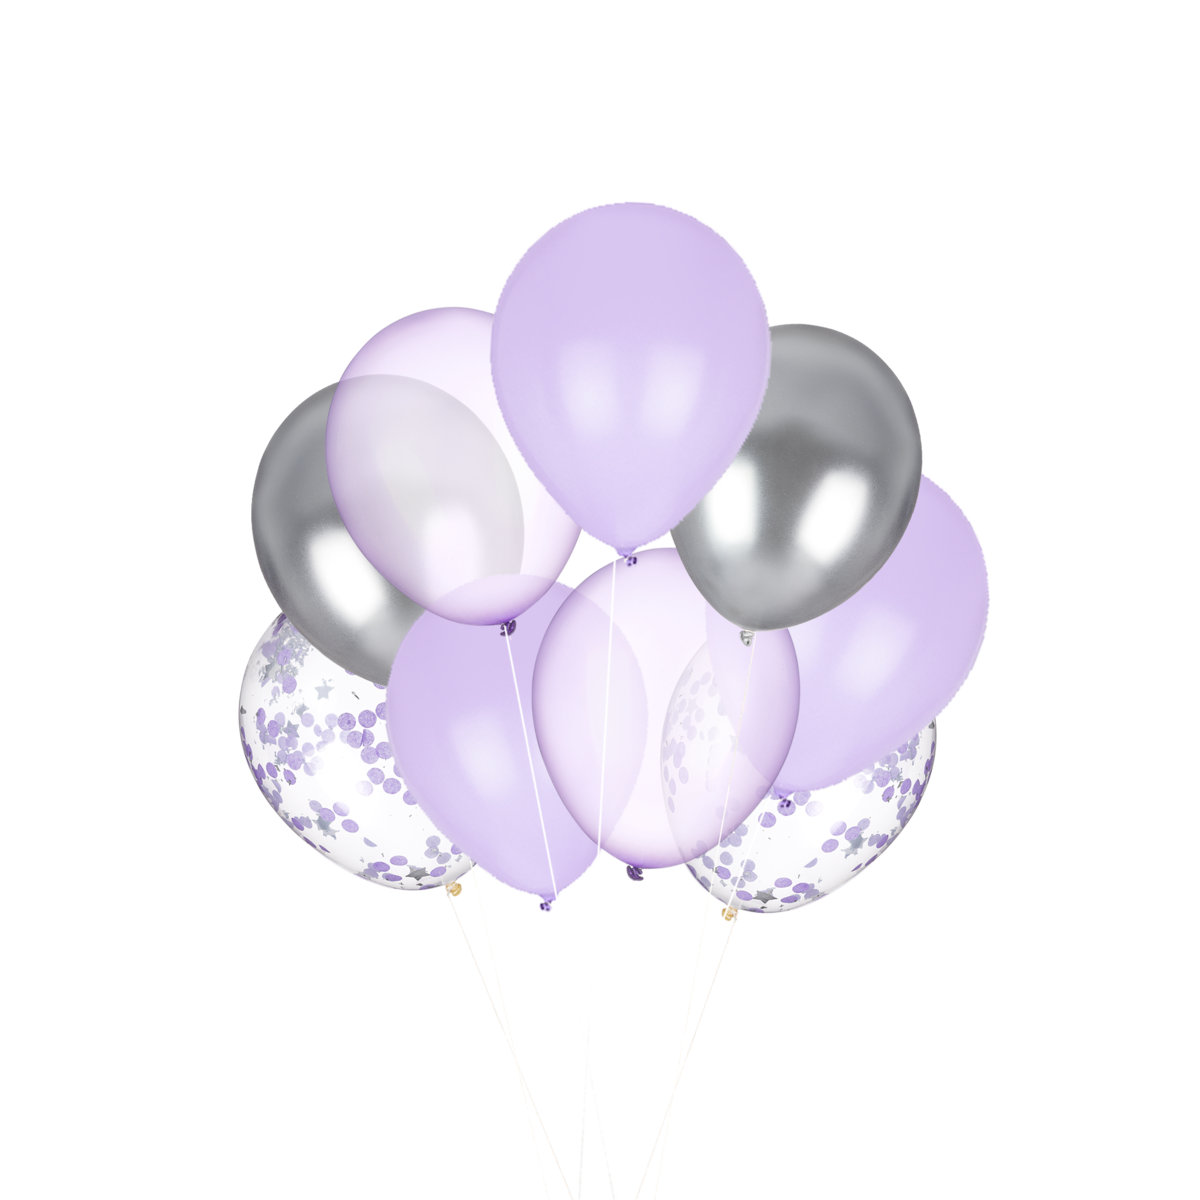 Potion Classic Balloon Bouquet - ONE UP BALLOONS